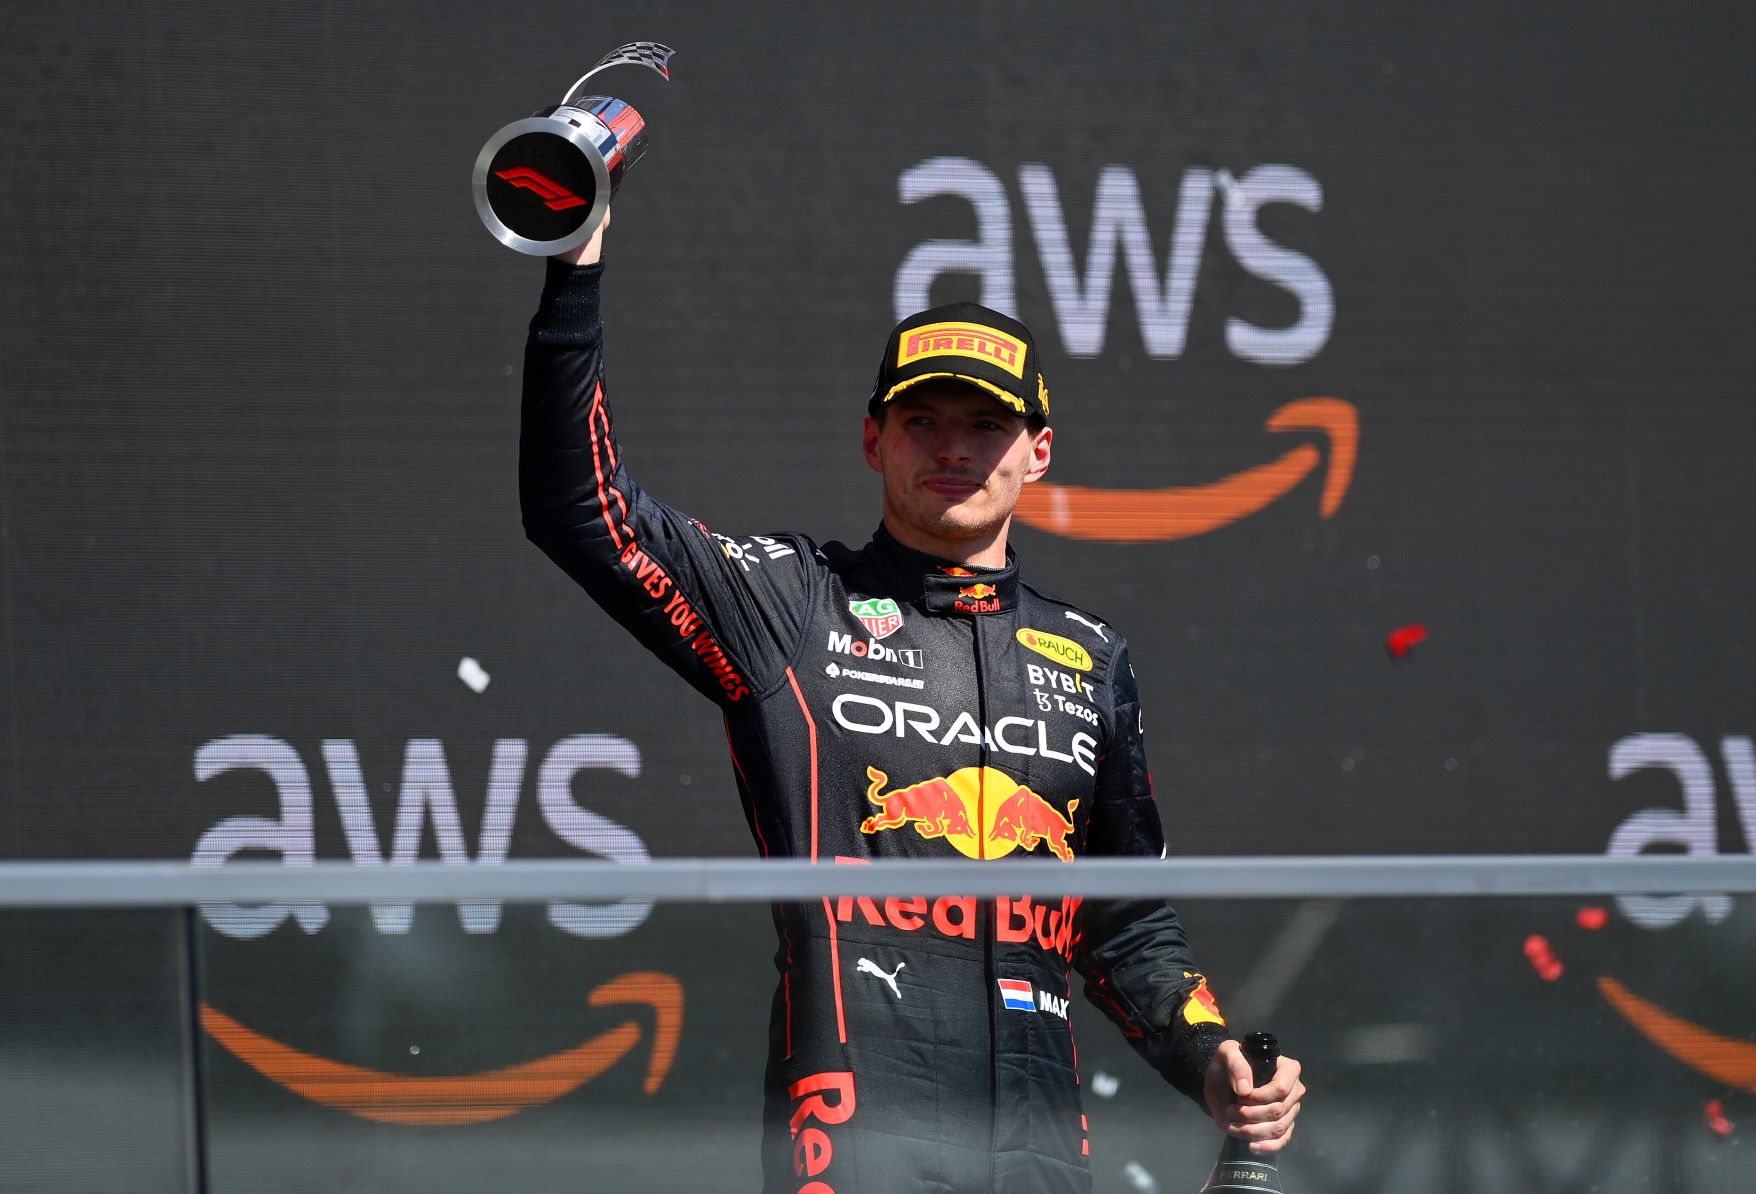 F1 Drivers Championship: Max Verstappen EXTENDS his LEAD, Sergio Perez stays second after DNF as Leclerc mounting pressure on the Mexican – Check standings